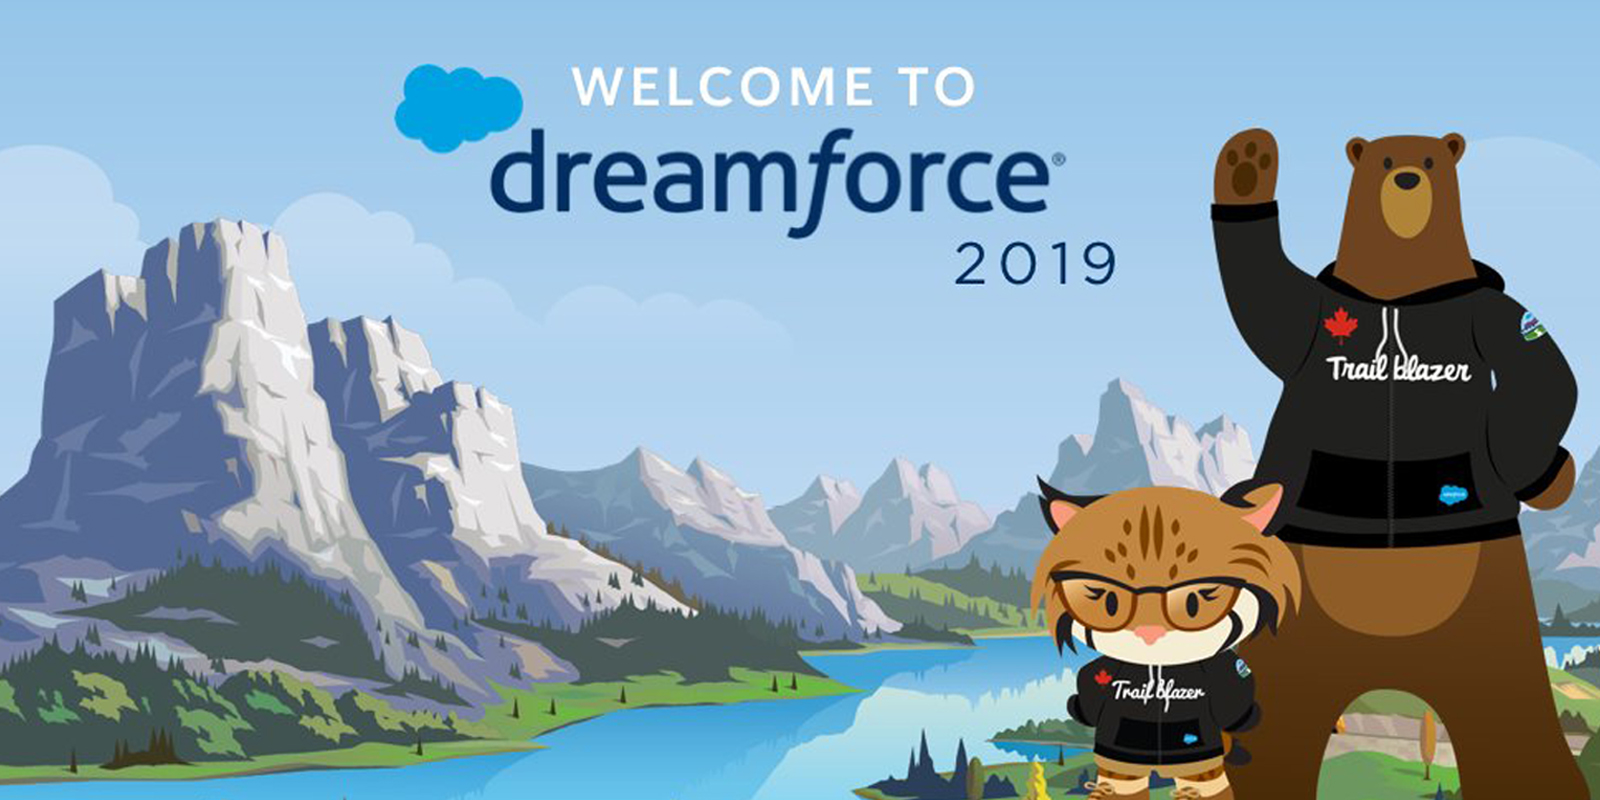 What to Expect at Dreamforce 2019